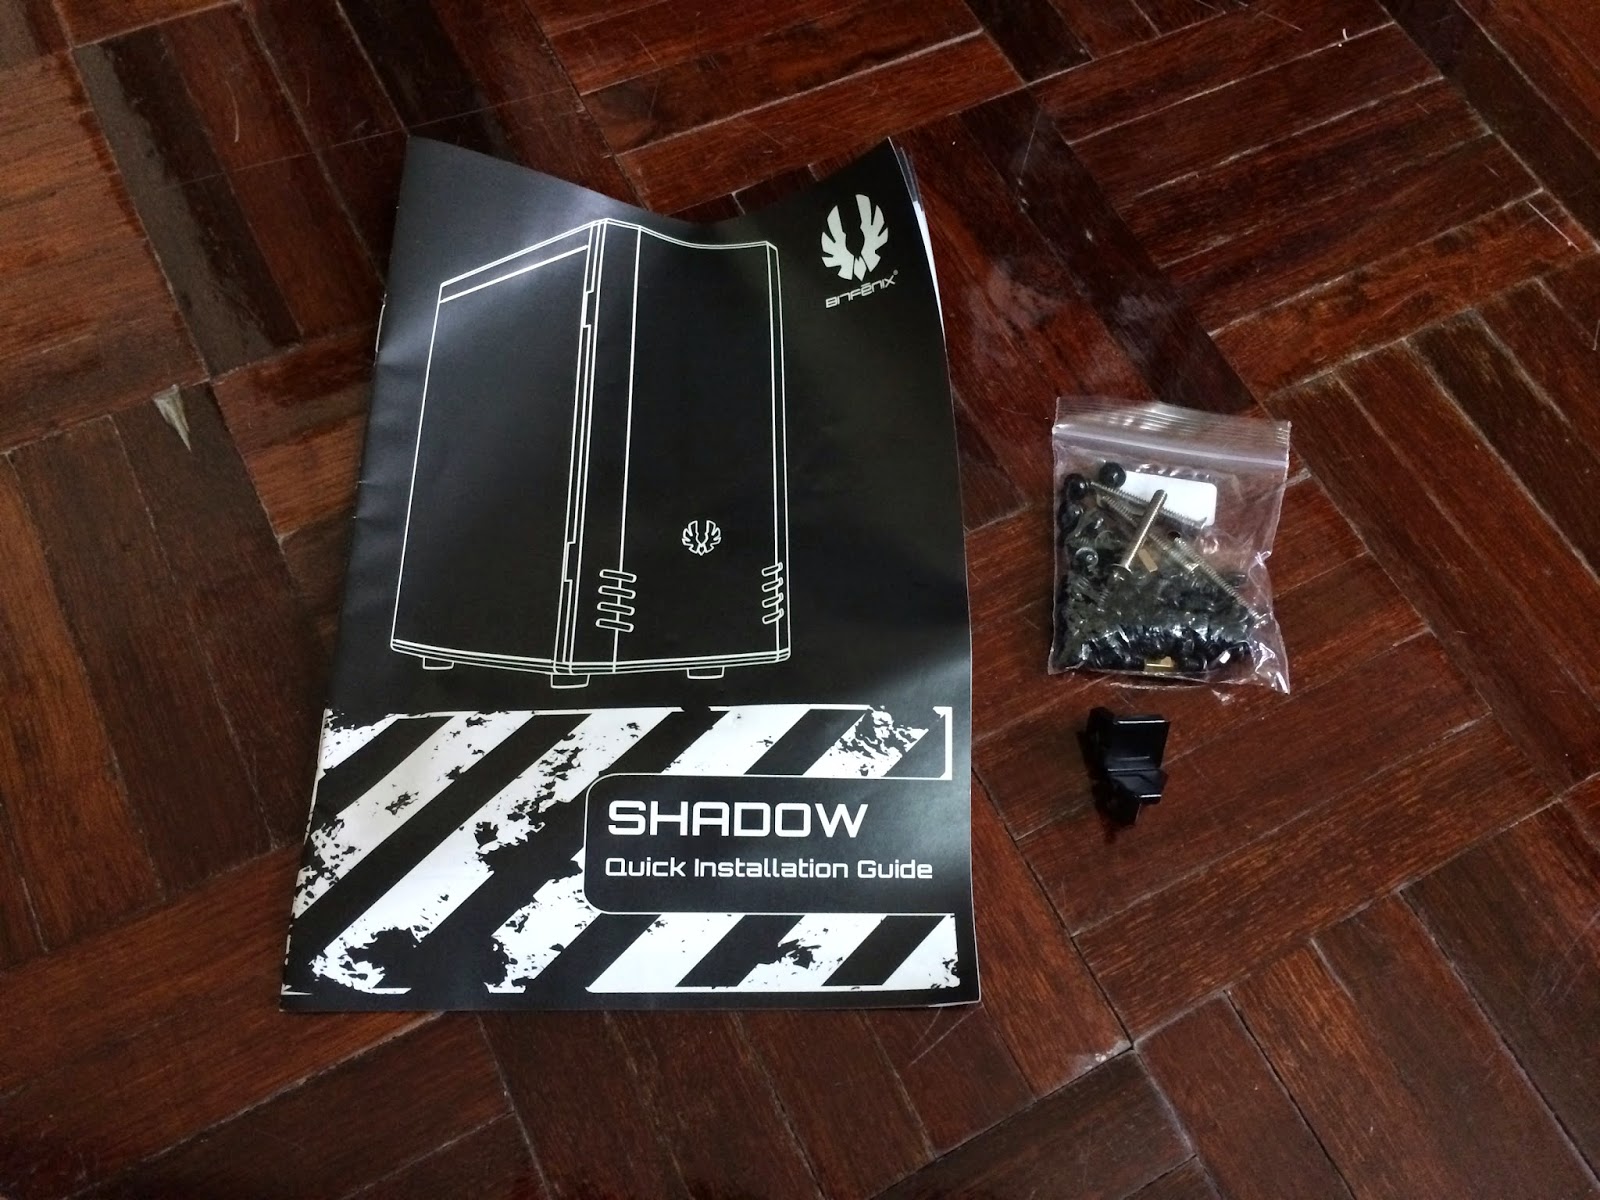 Unboxing & Review: Bitfenix Shadow 10